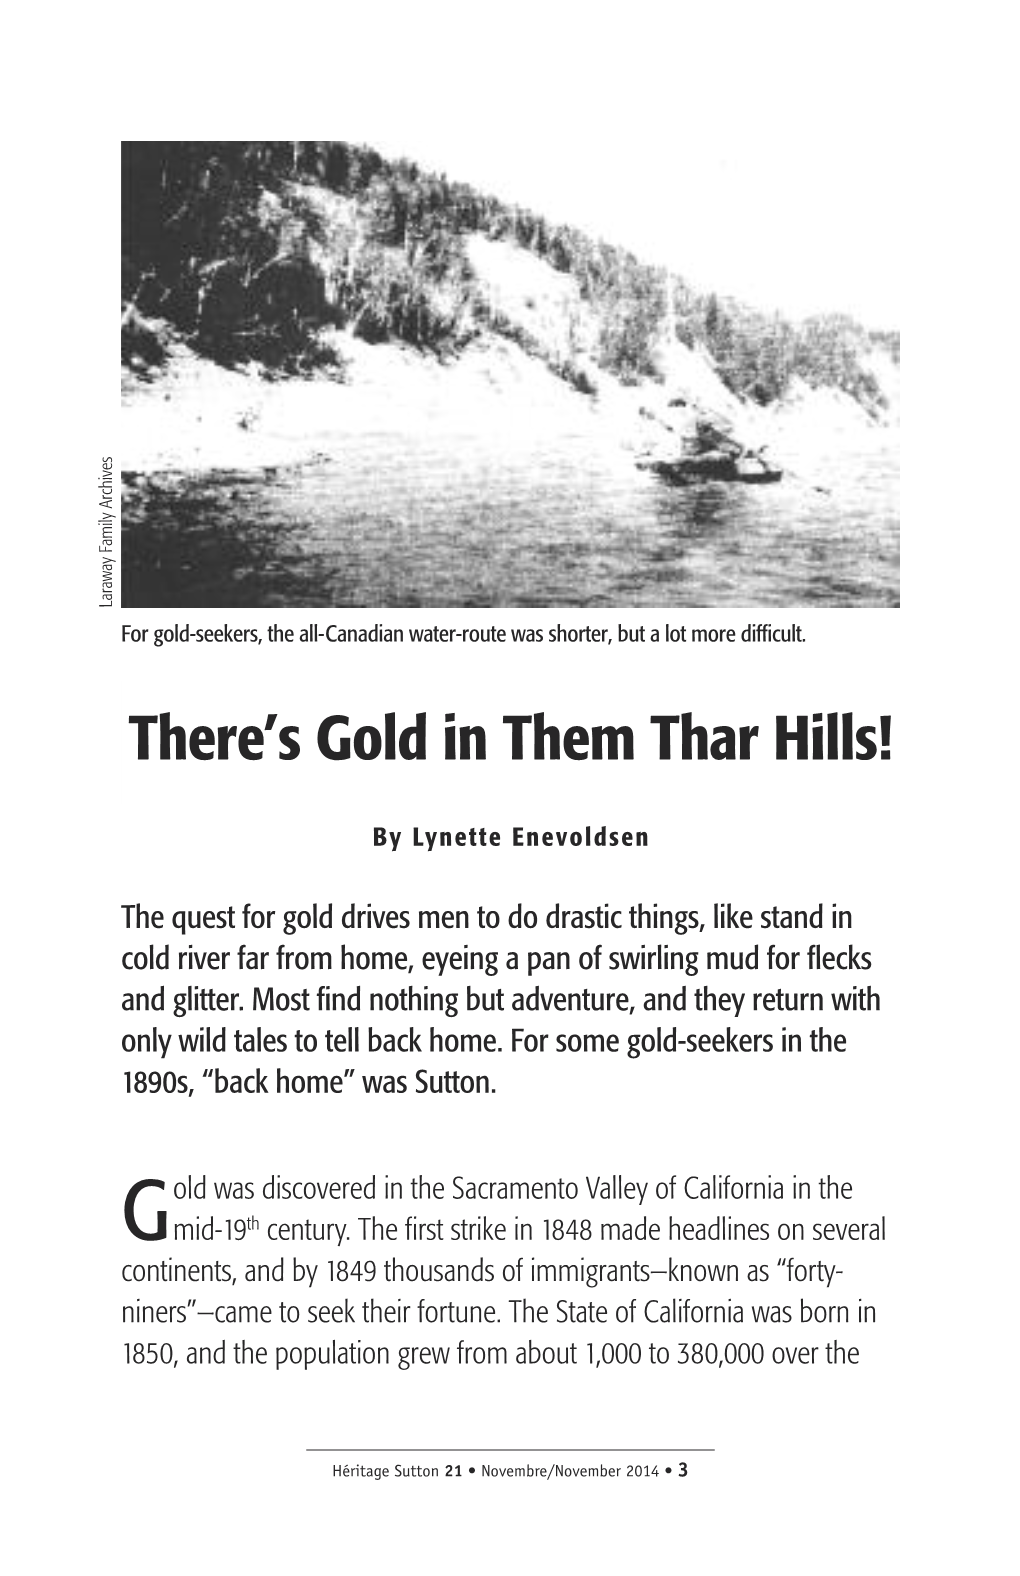 There's Gold in Them Thar Hills!